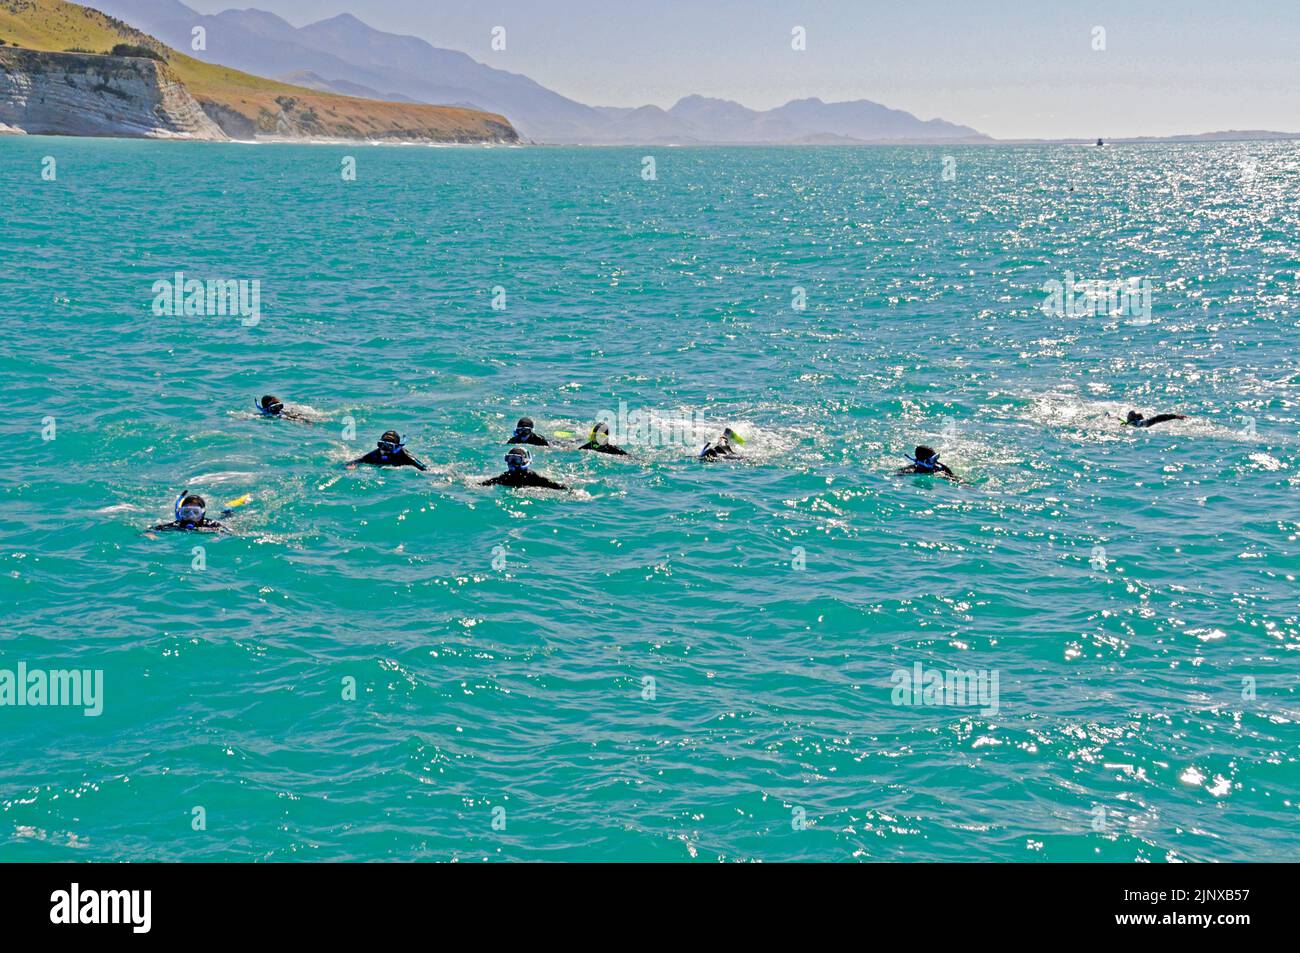 A small party of tourists in wet suits and goggles from a Swim with dolphin boat, try to swim closer to a pod of Dusky dolphins in the Pacific Ocean Stock Photo